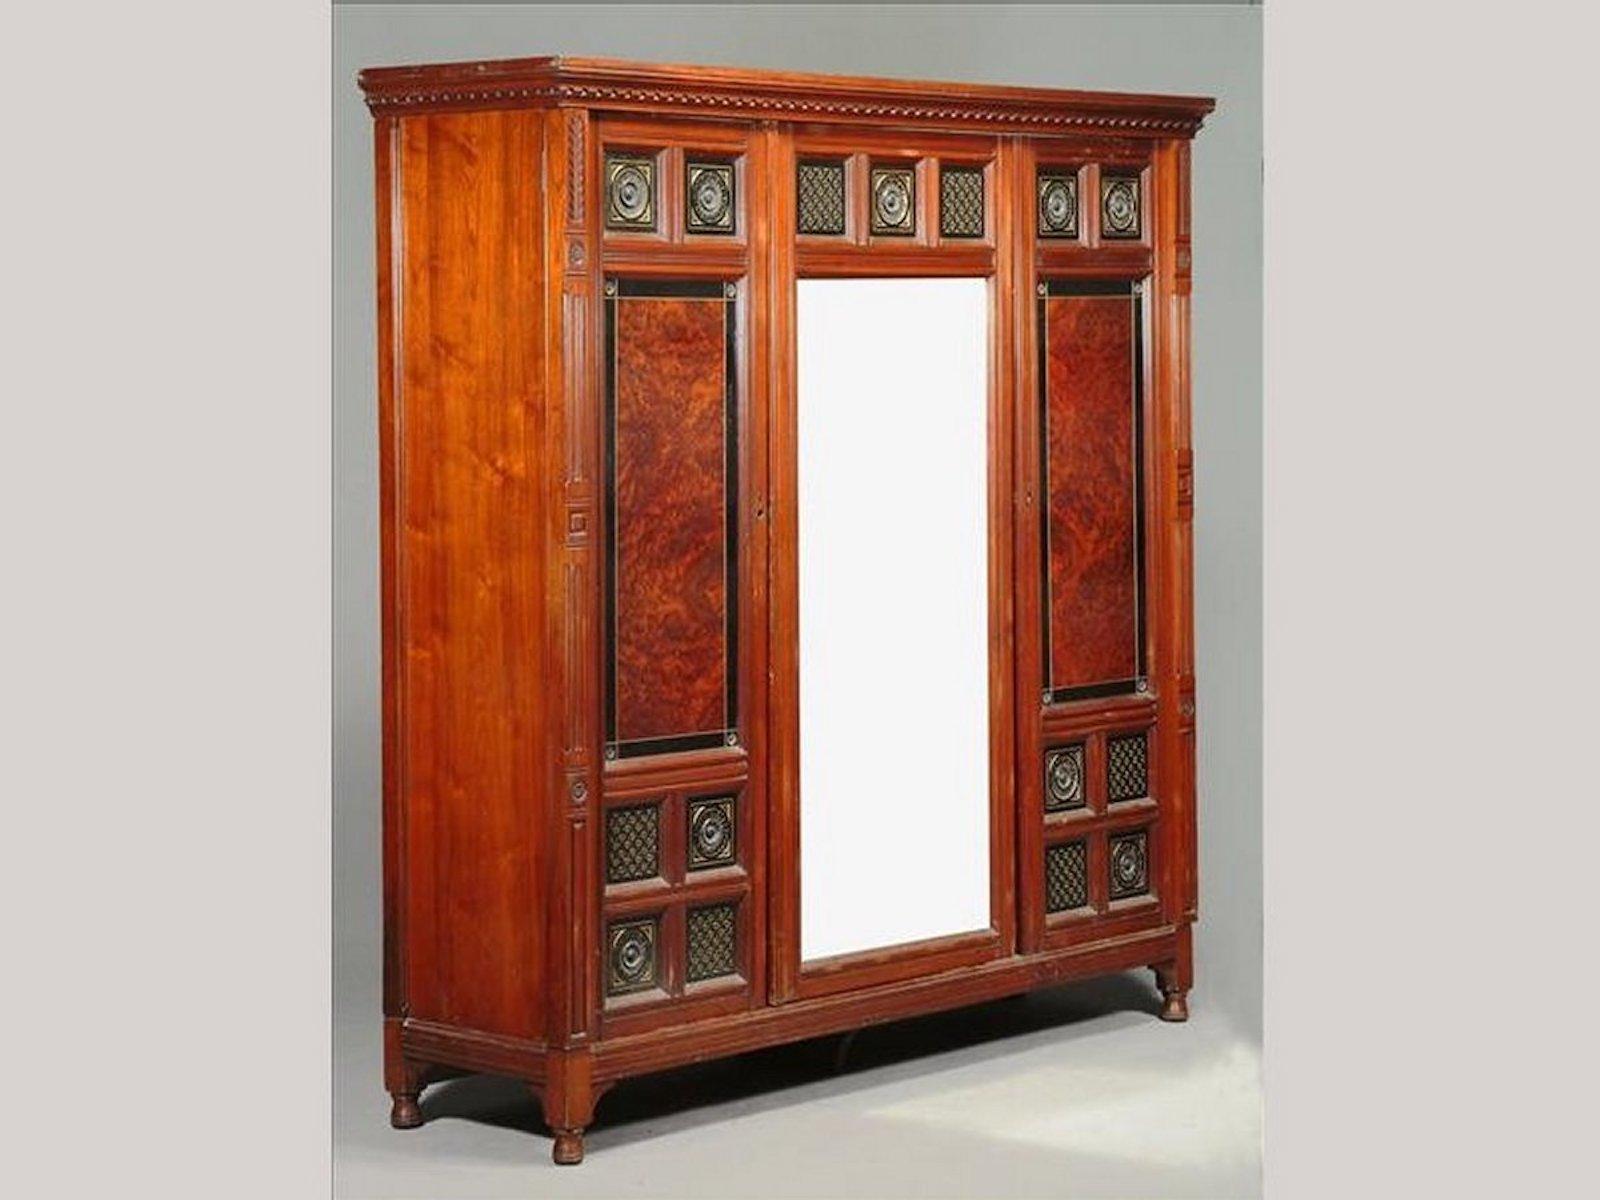 Bruce Talbert (1838-1881) for Gillow and co., a rare and important walnut, amboyna, ebonized, and gilt bedroom suite, each with differing carved rosettes, comprising: a triple mirror door wardrobe, 208cm high, 208cm wide, 58cm deep; a pair of